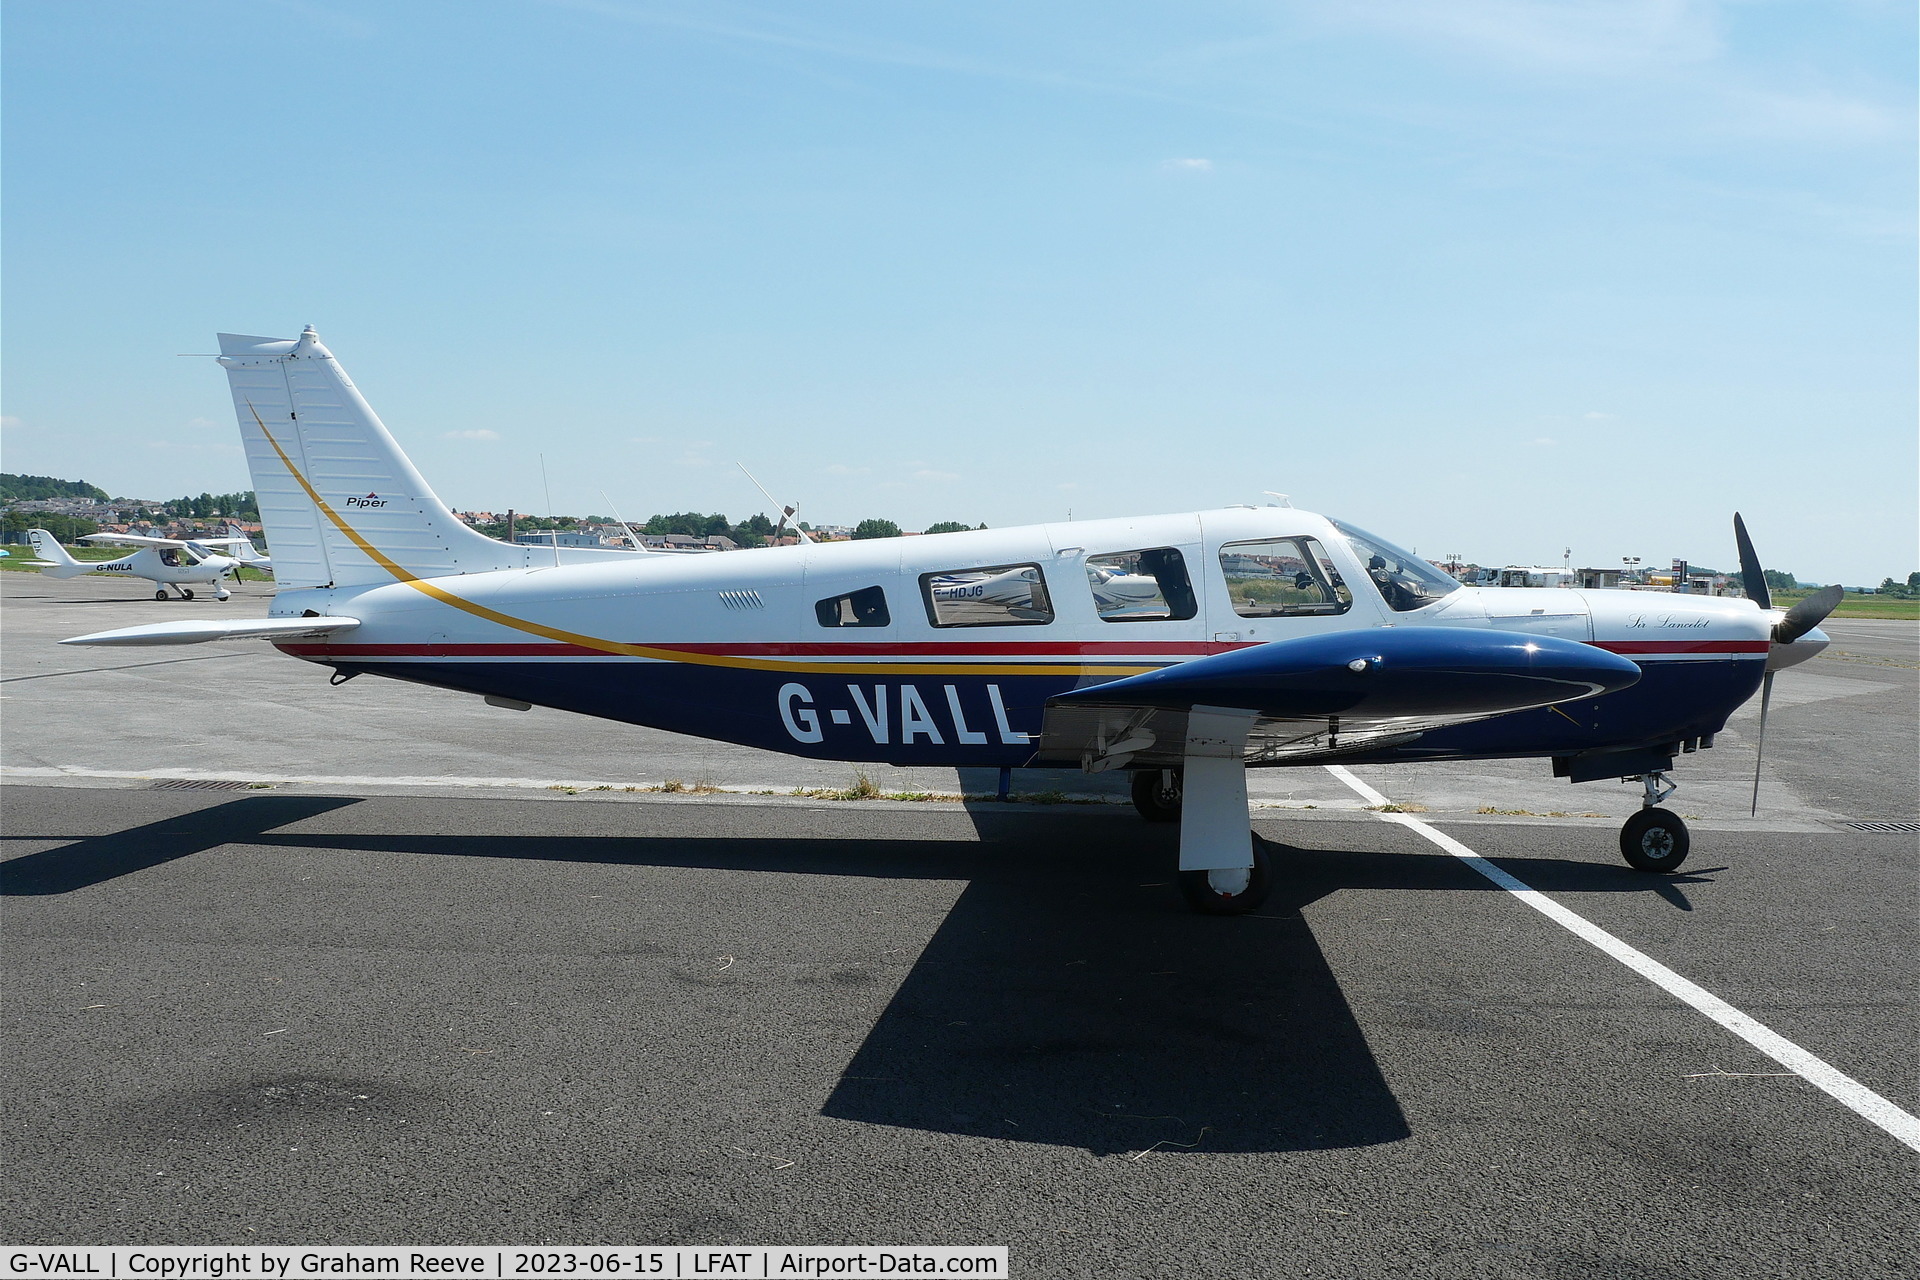 G-VALL, 1978 Piper PA-32R-300 Cherokee Lance C/N 32R-7780515, Parked at Le Touquet.